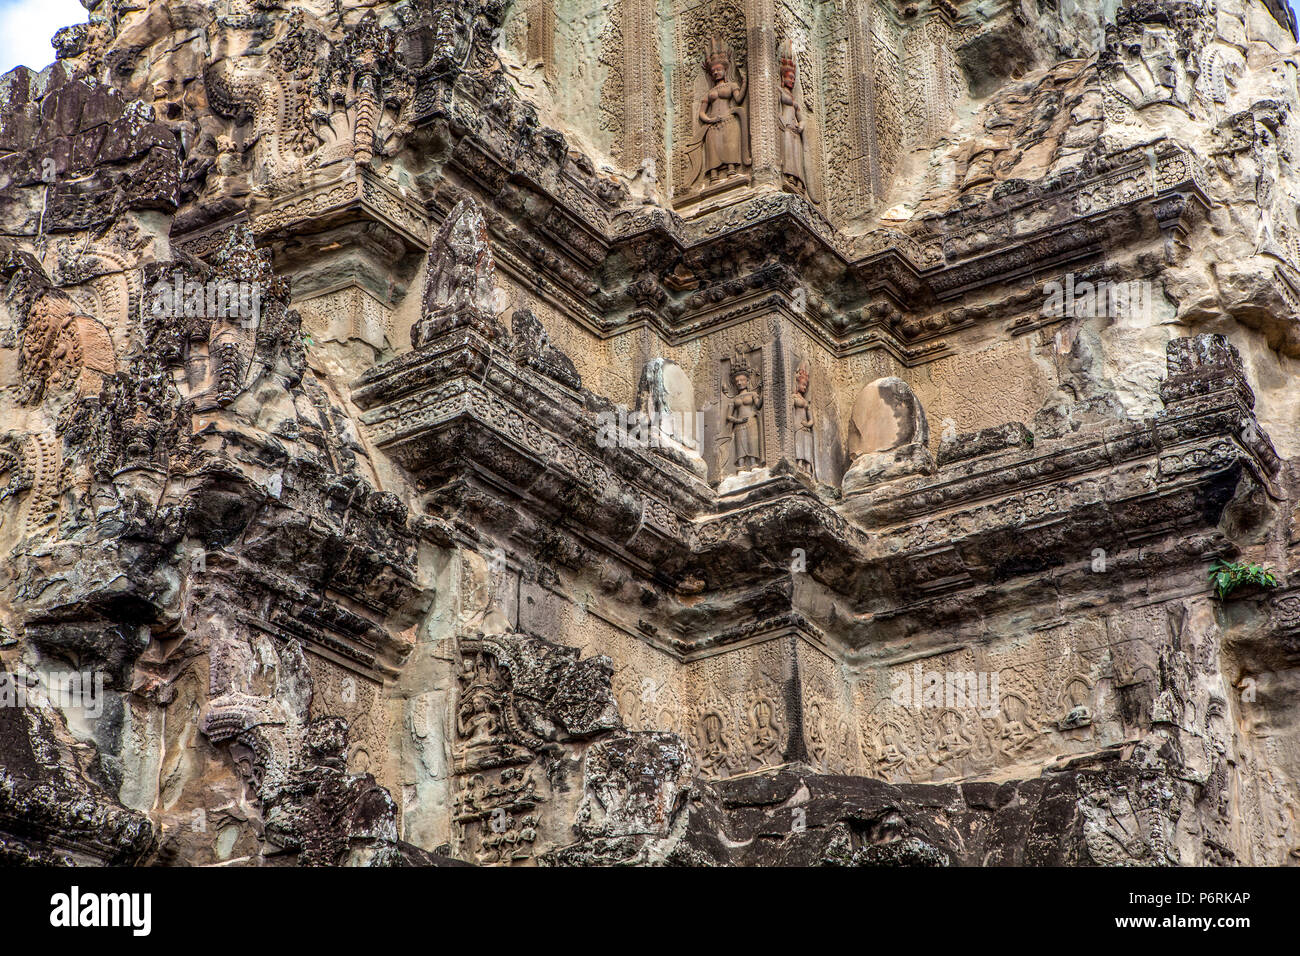 12th century carved sandstone tower at Angkor Wat, Siem Reap, Cambodia. Stock Photo